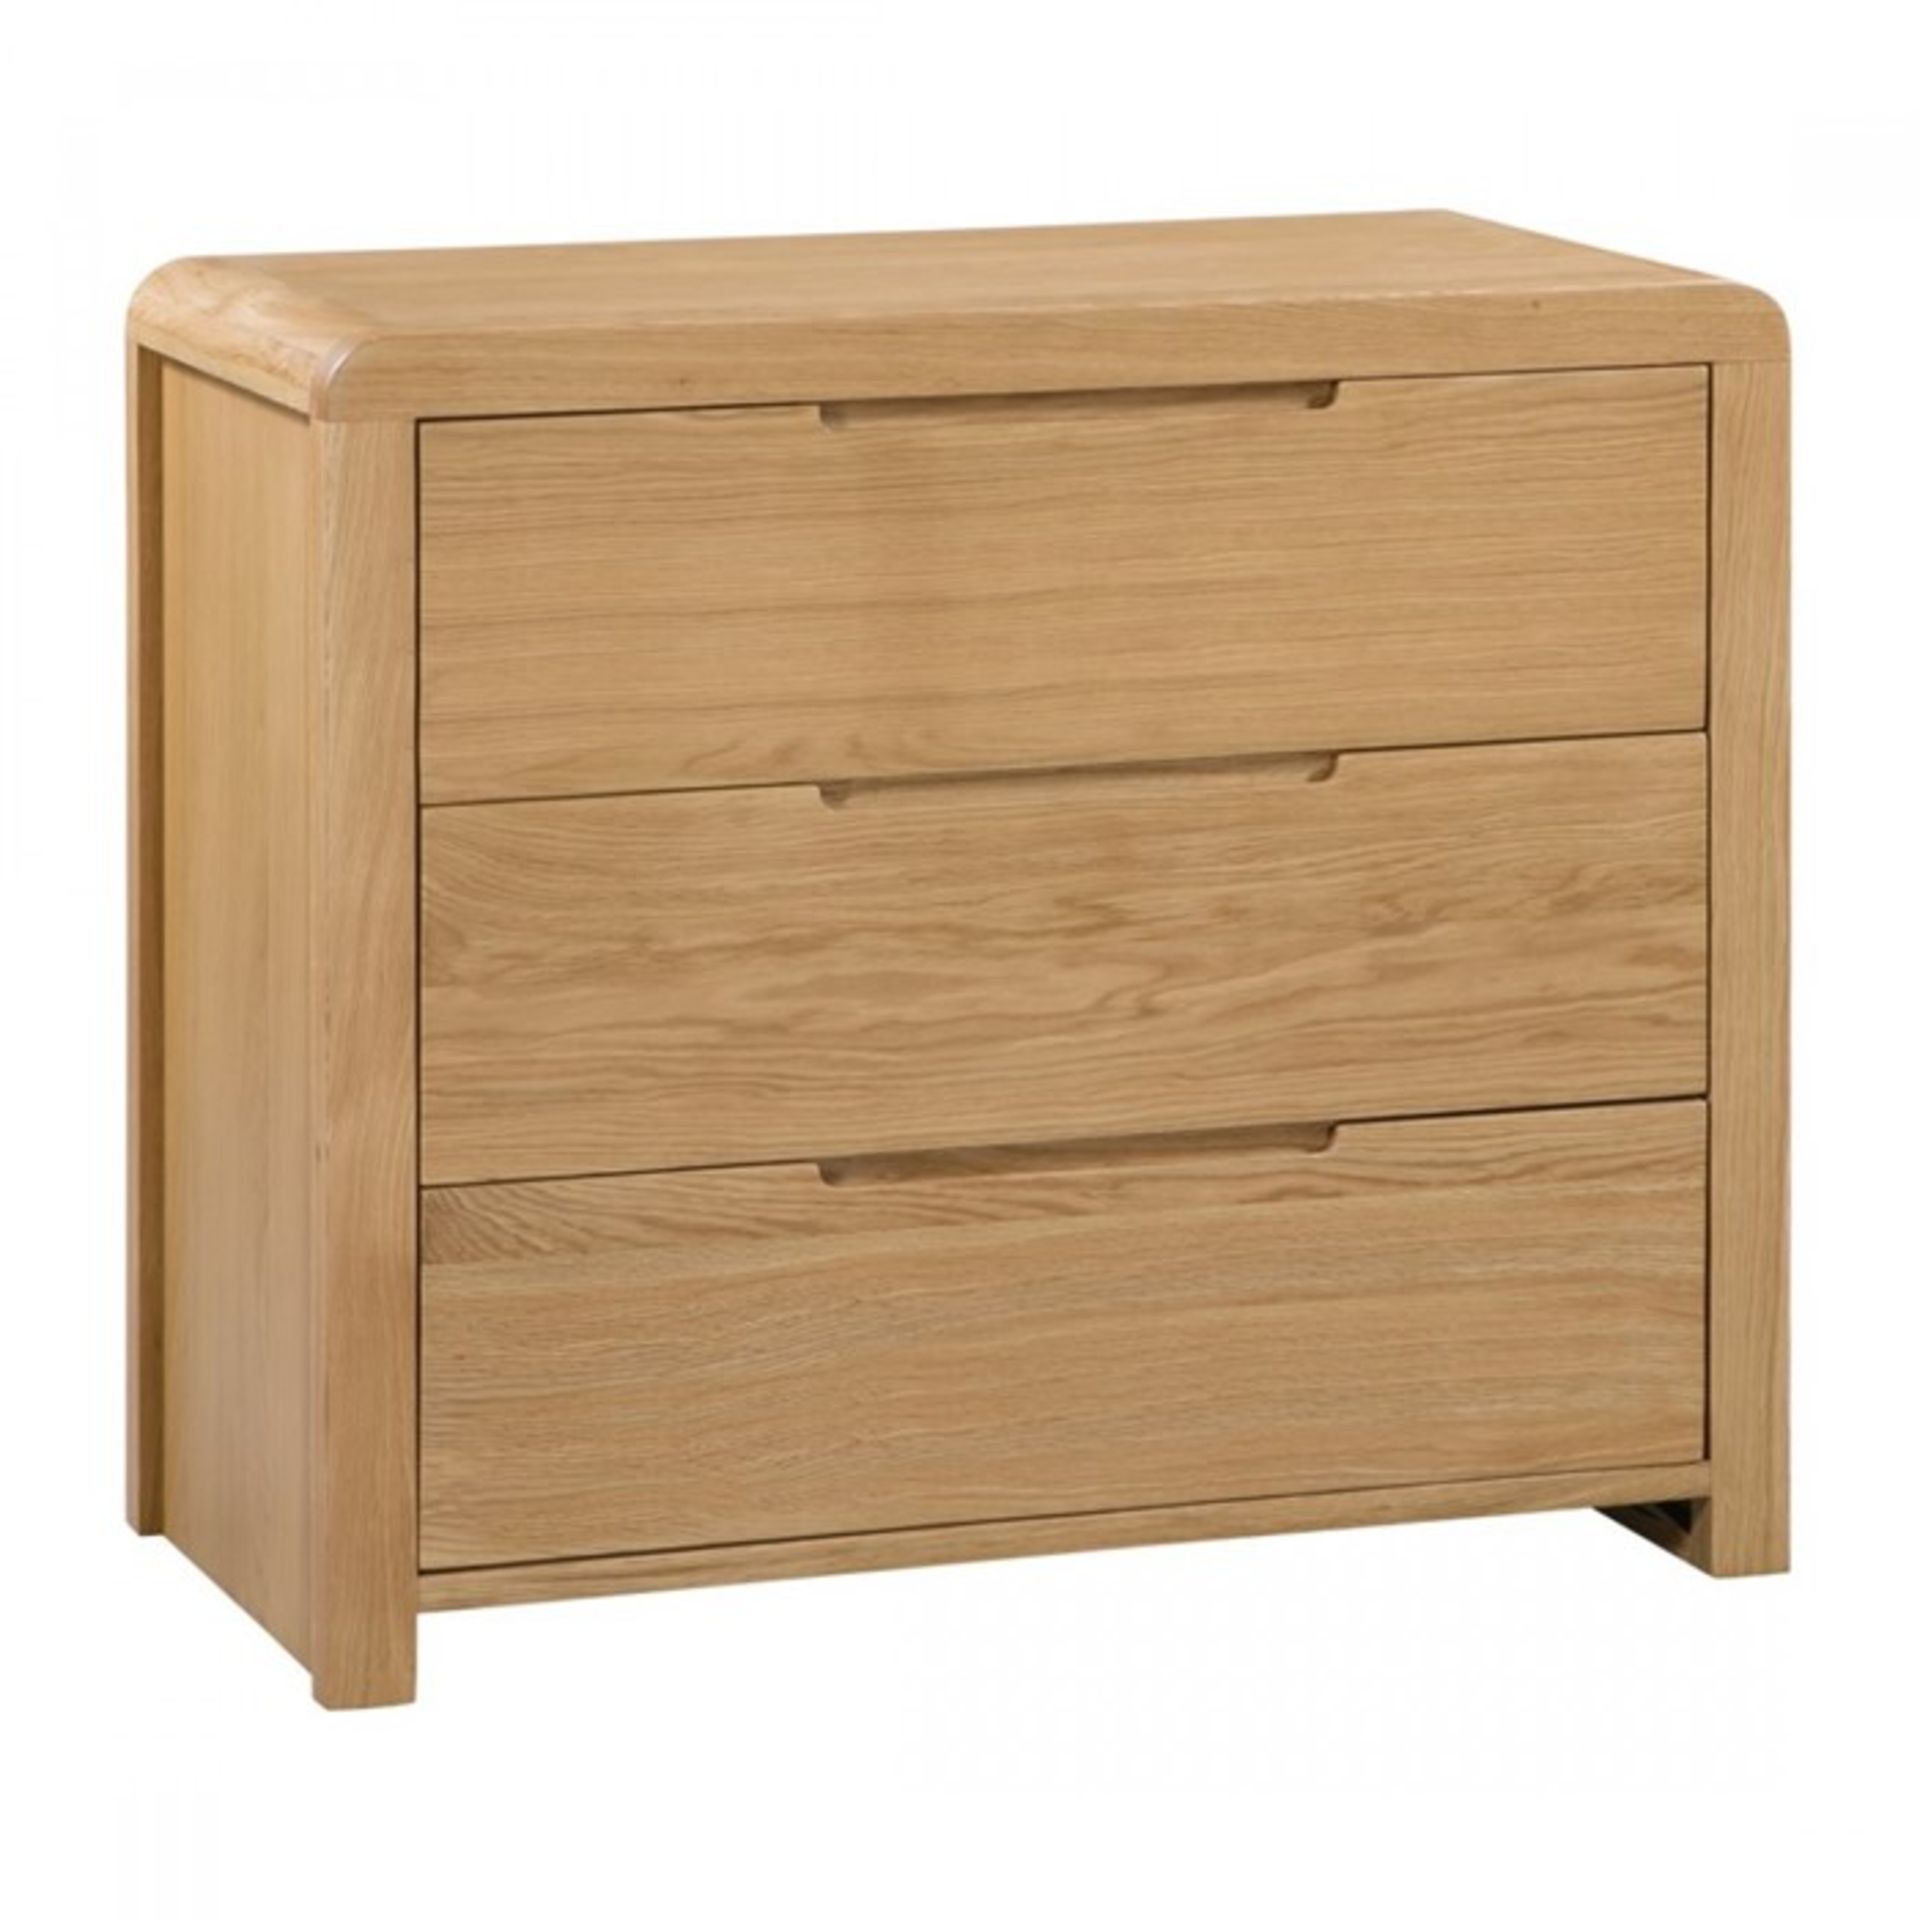 1 BOXED CURVE 3 DRAW BEDSIDE CHEST IN OAK (PUBLIC VIEWING AVAILABLE)